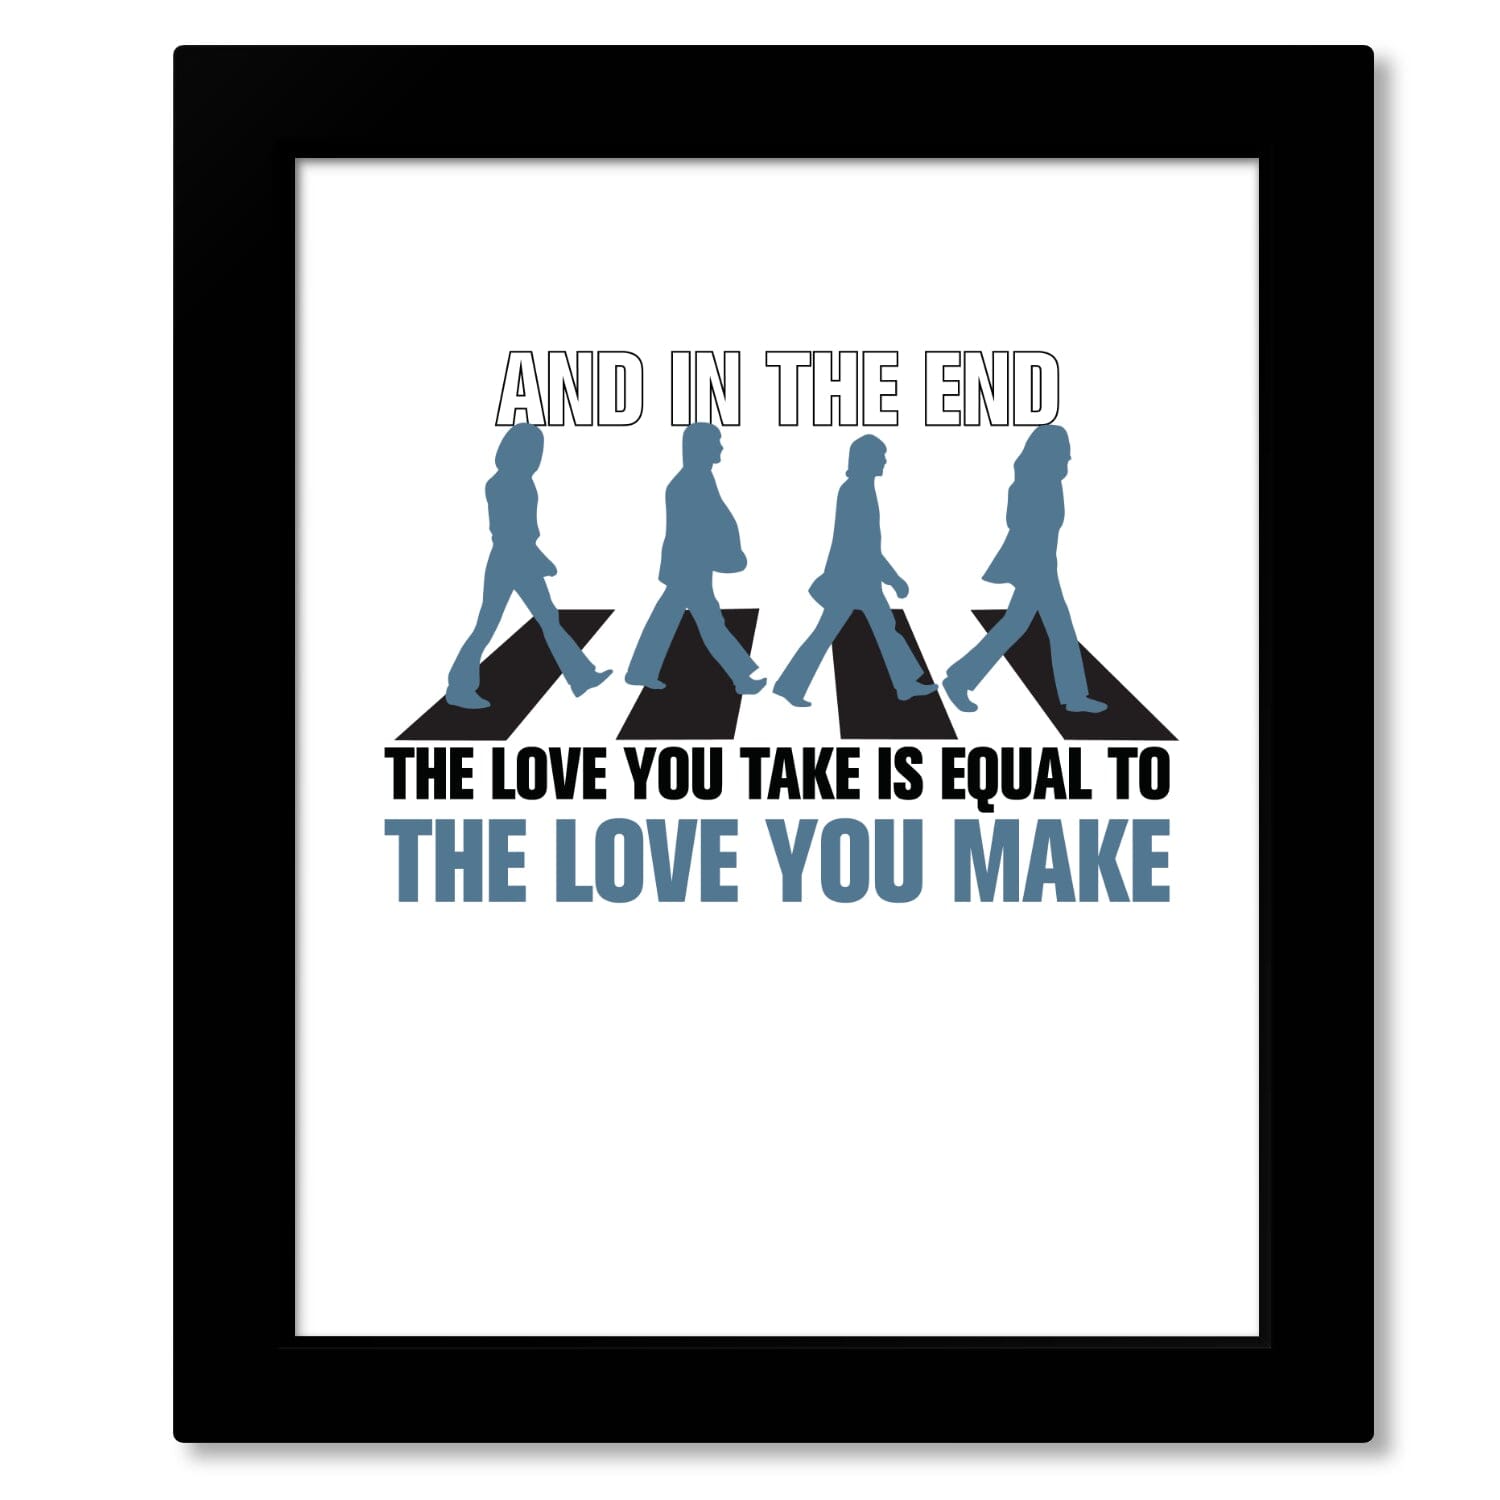 The End by the Beatles - Song Lyric Music Poster Art Print Song Lyrics Art Song Lyrics Art 8x10 Framed Print (without mat) 